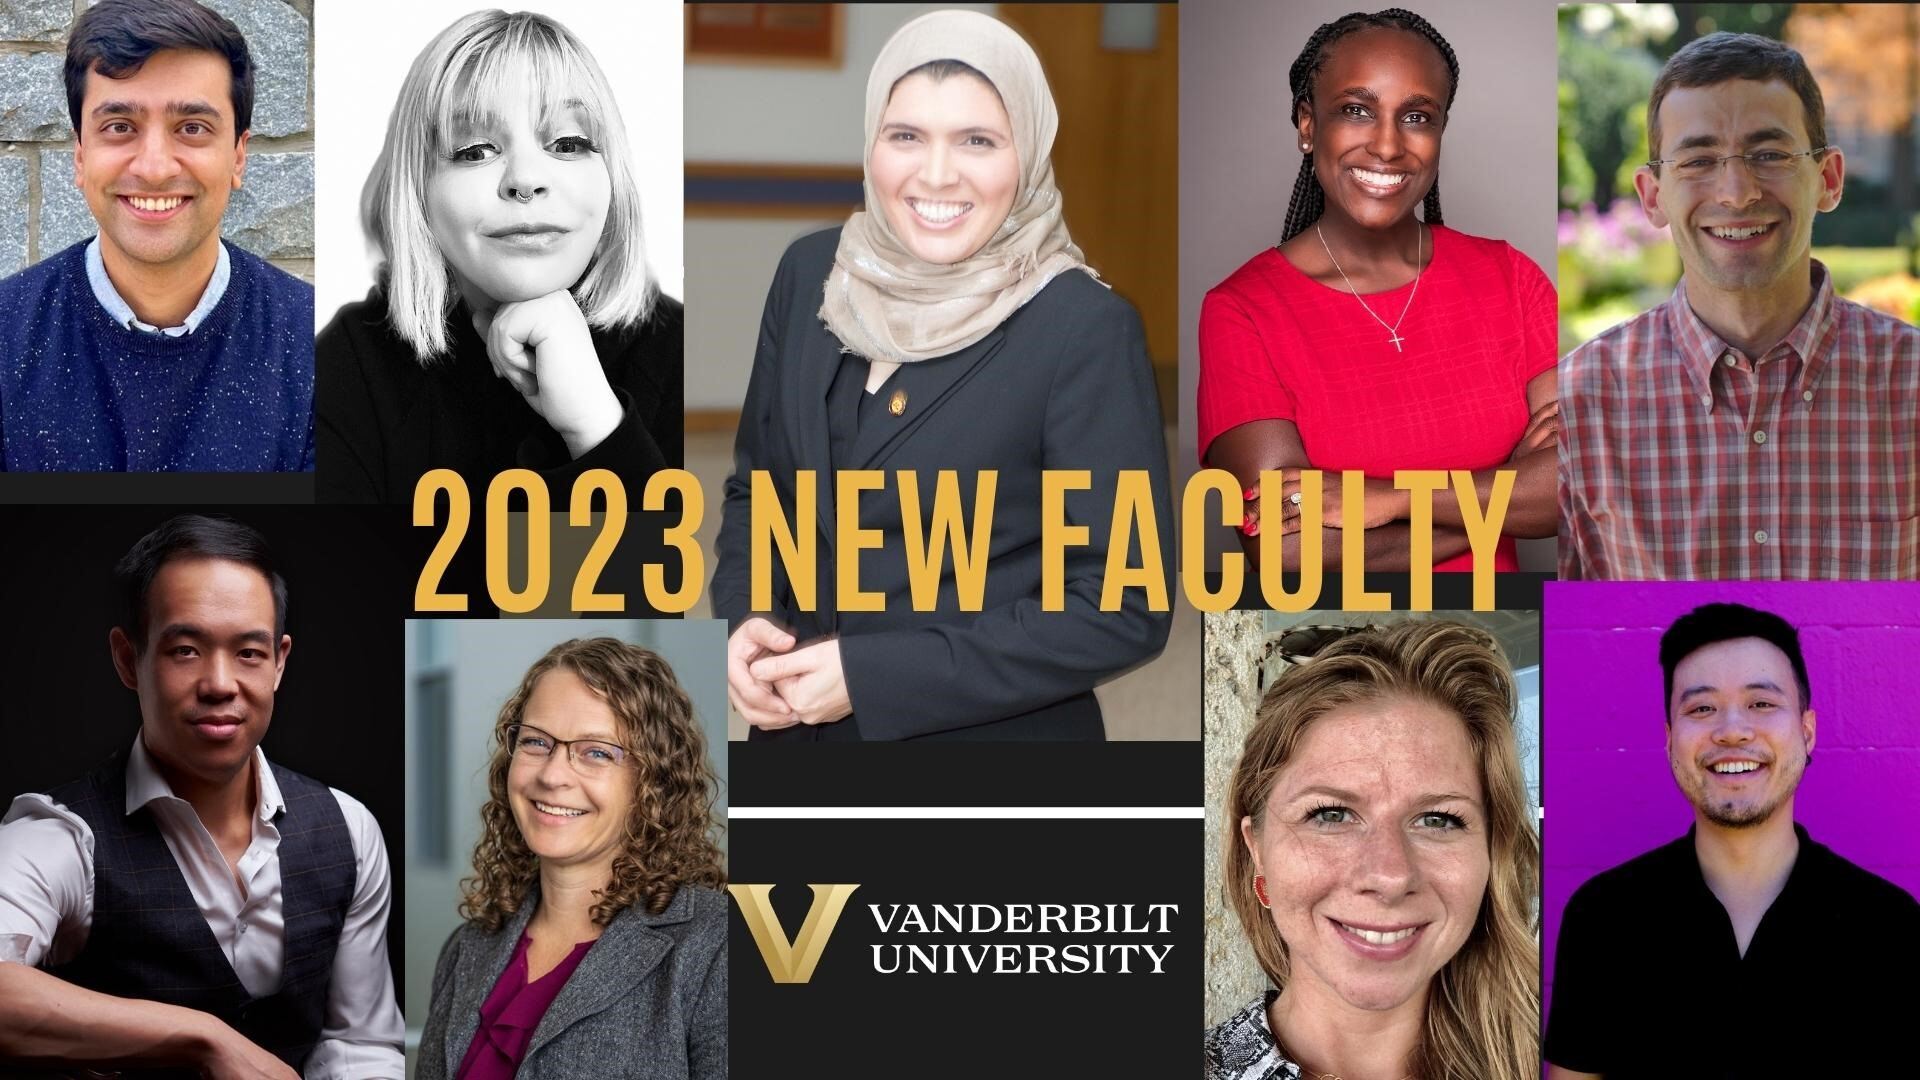 NEW FACULTY: Vanderbilt’s newest faculty share what ‘dare to grow’ means to them